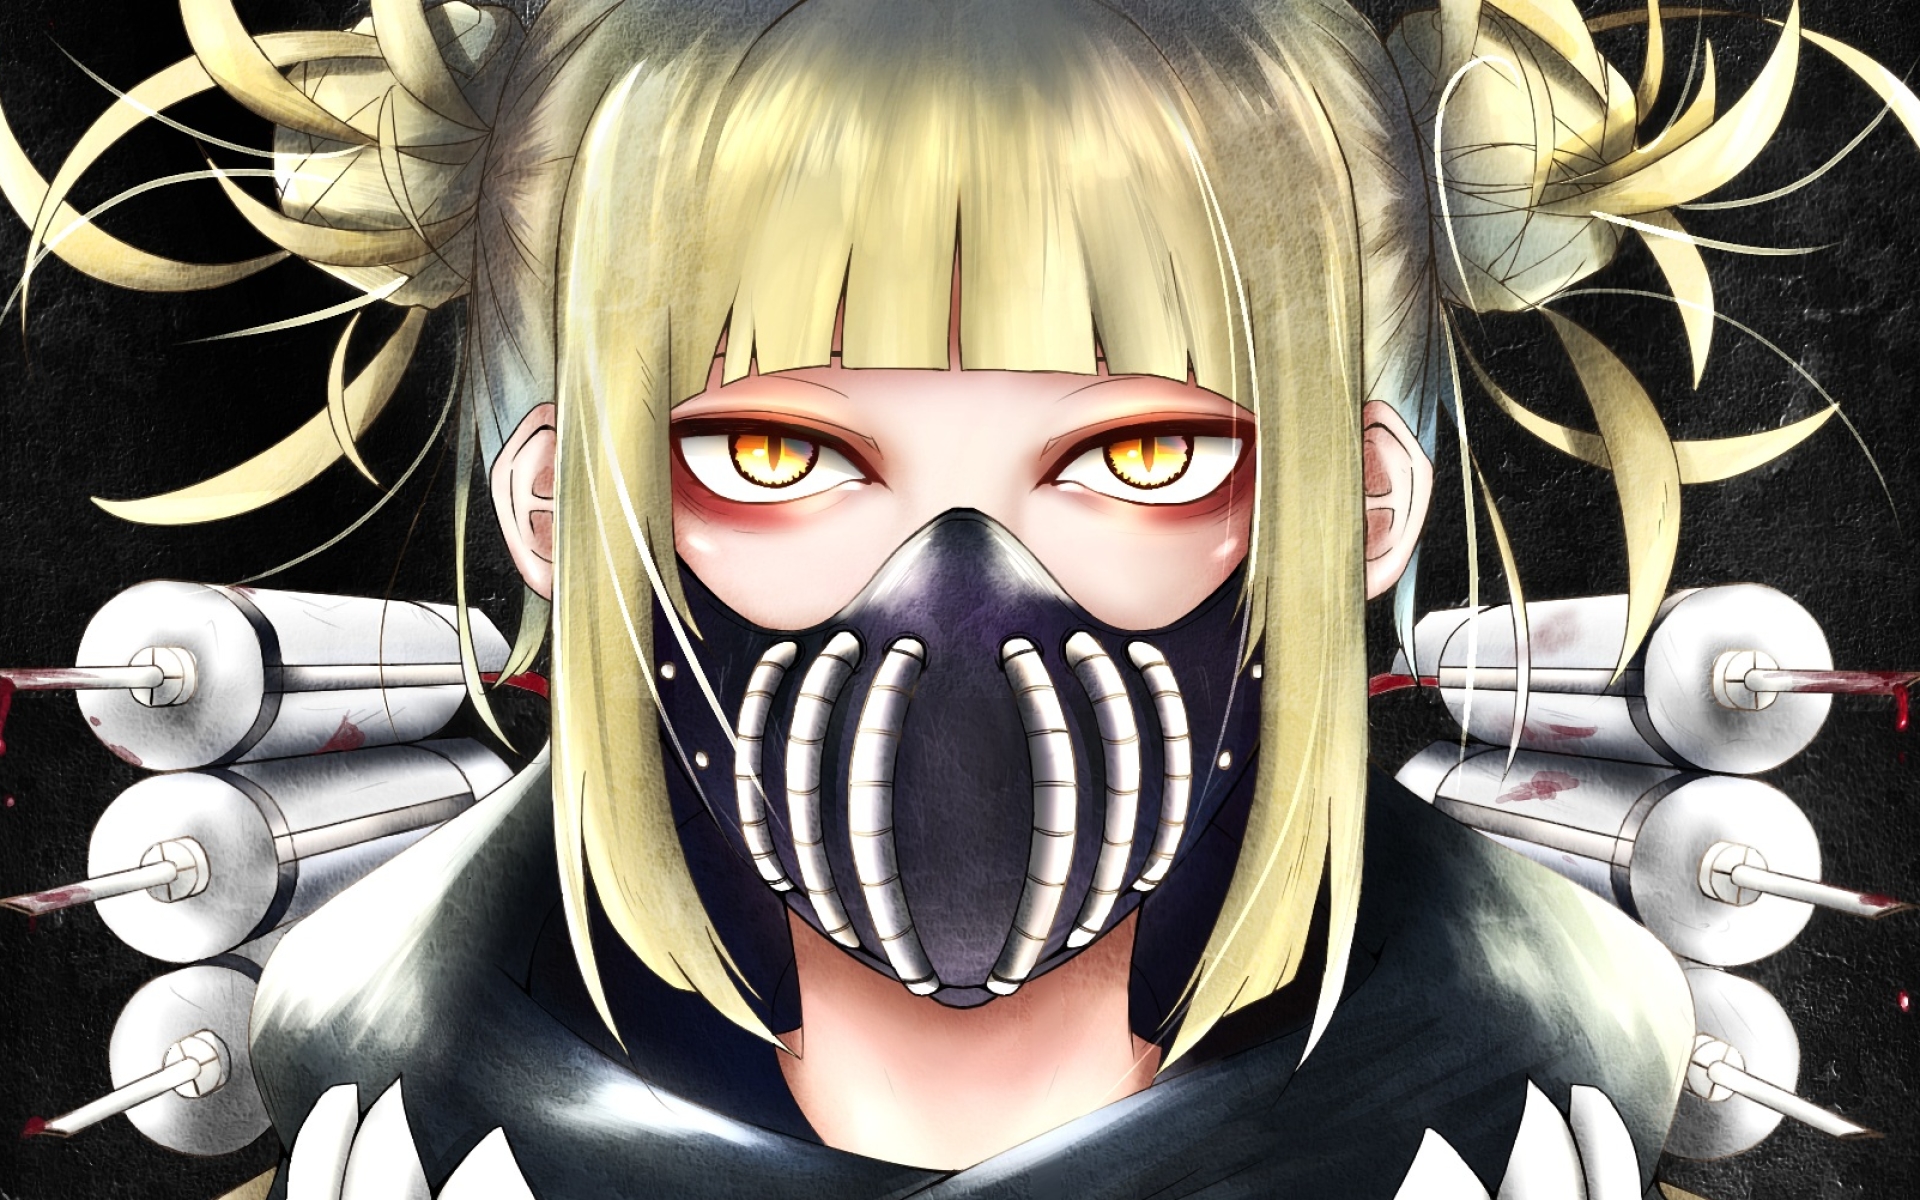 Download wallpapers Himiko Toga, girl in mask, female.